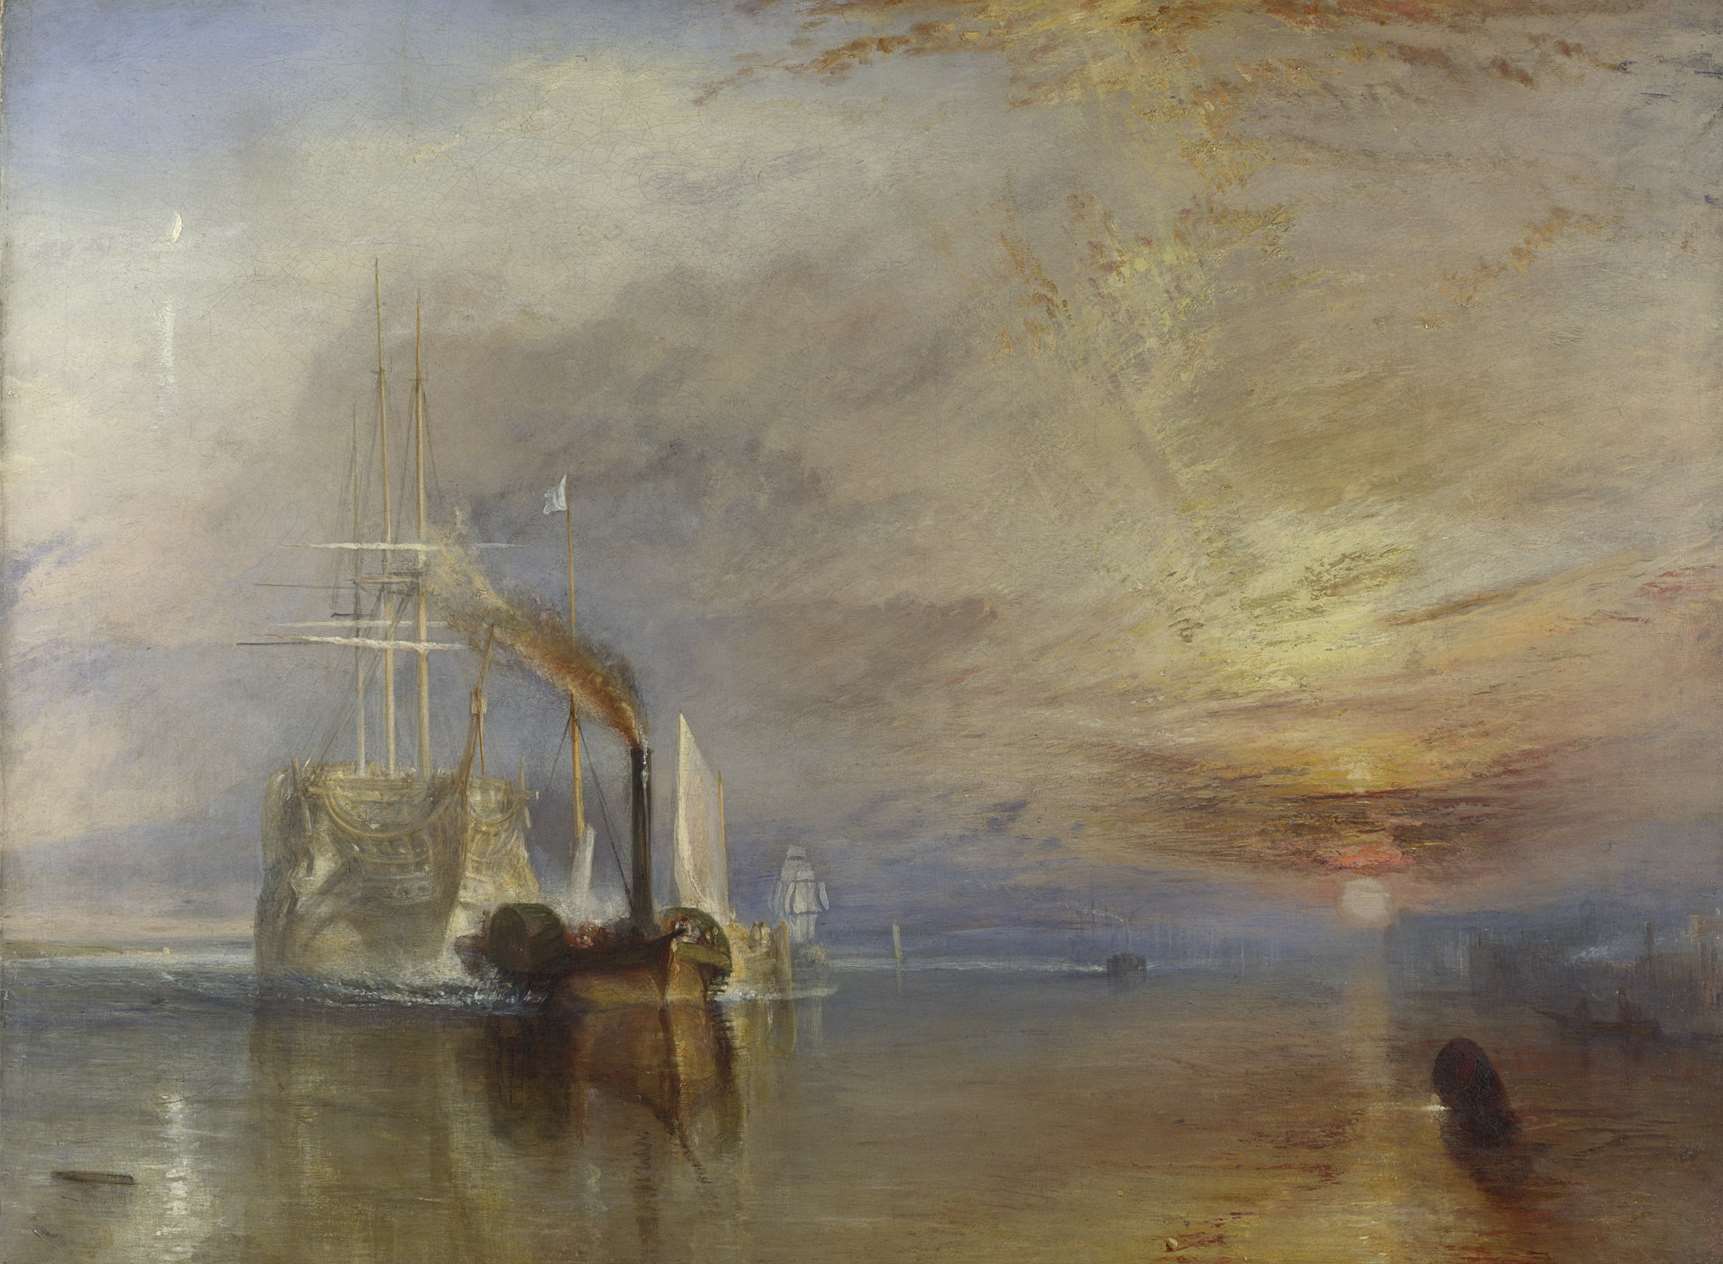 The Gravesend steam tug taking The Fighting Temeraire on its last journey to the scrapyard. It had fought valiantly at the Battle of Trafalgar in 1805. The oil painting is by artist J.M.W Turner whose face will appear on the new £20 note. Courtesy of the National Gallery, London.